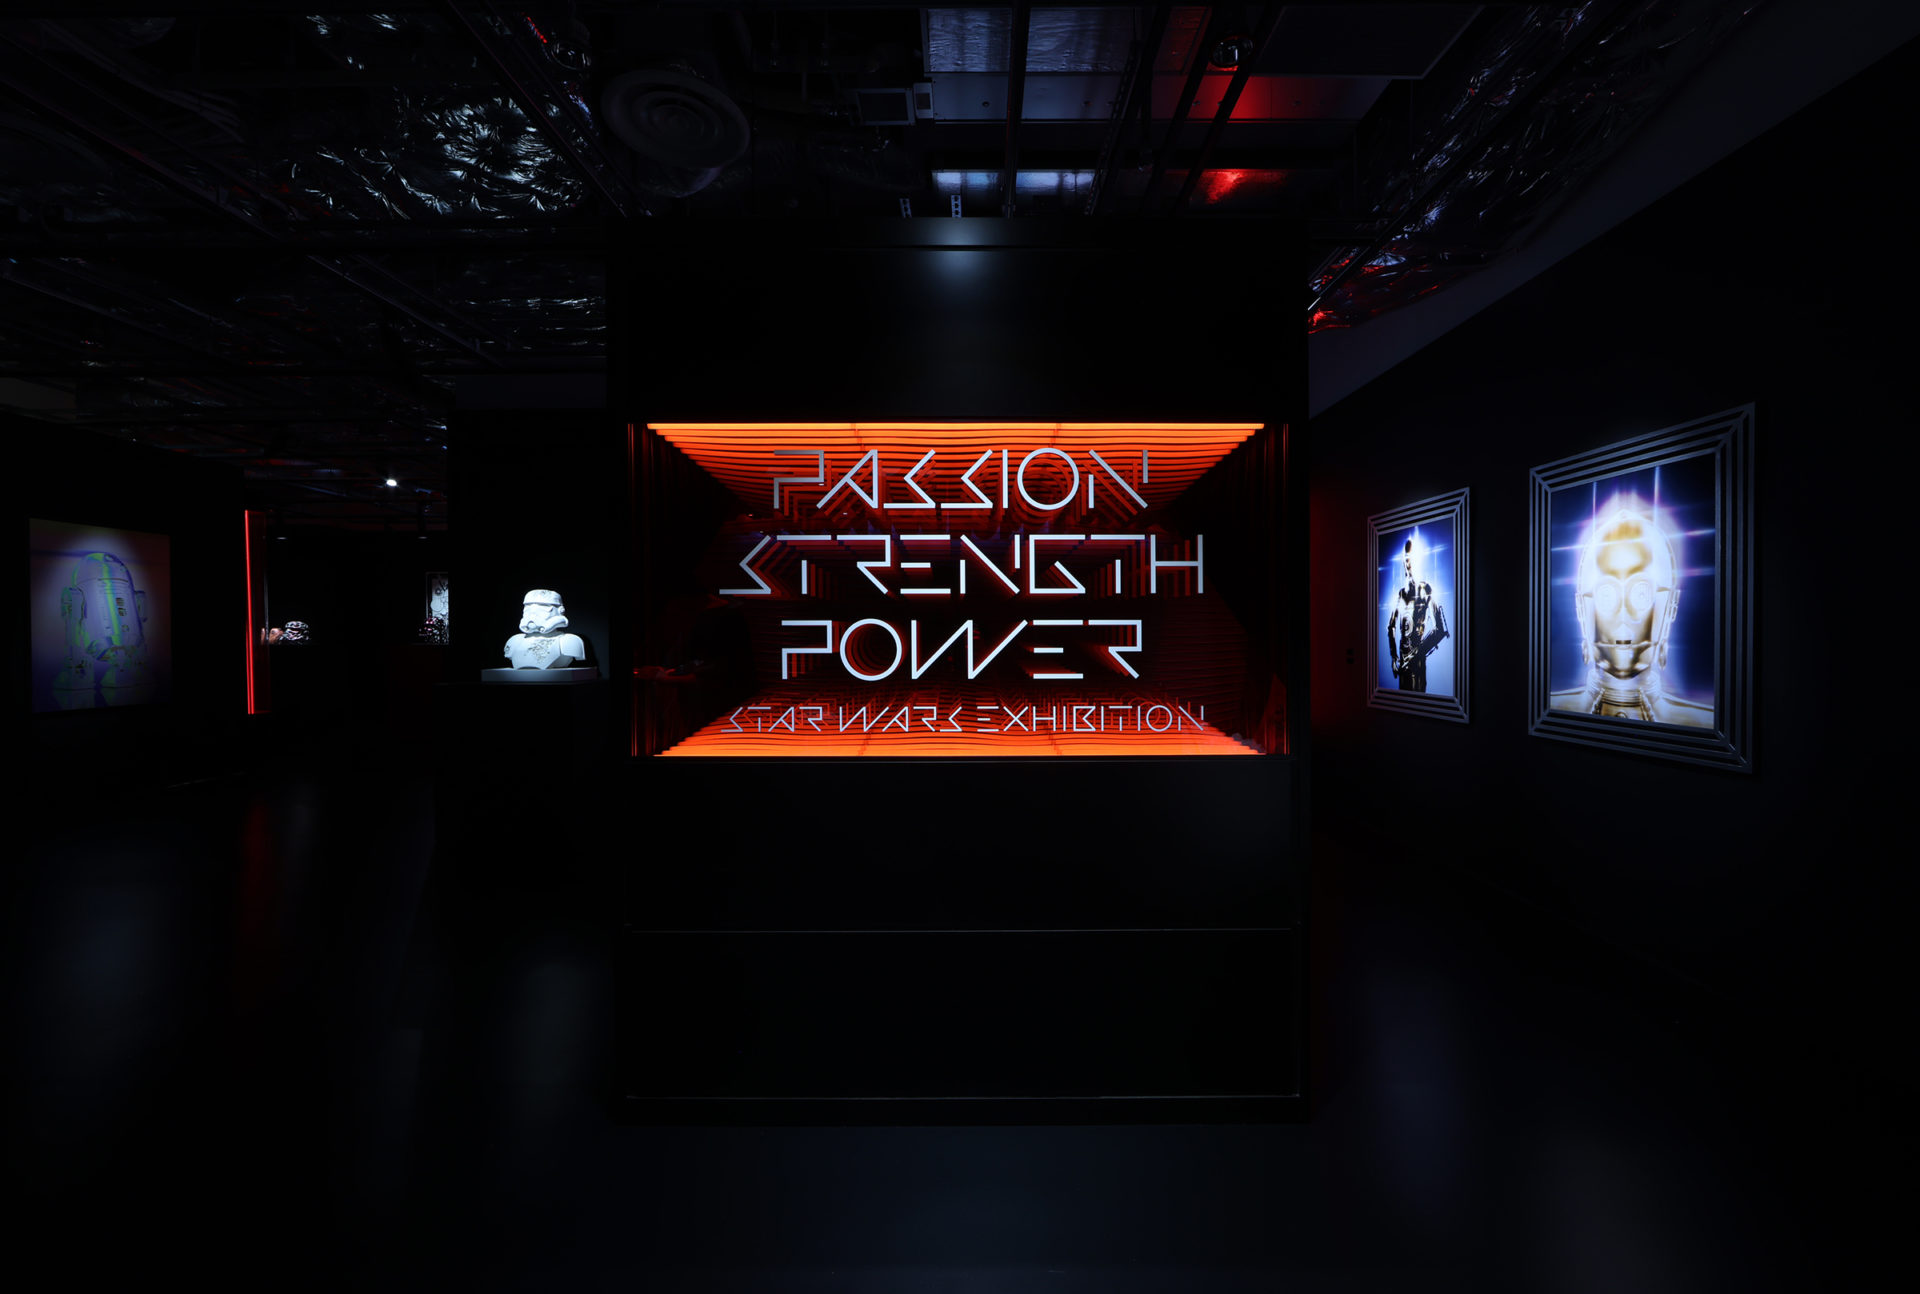 STAR WARS EXHIBITION “PASSION STRENGTH POWER”